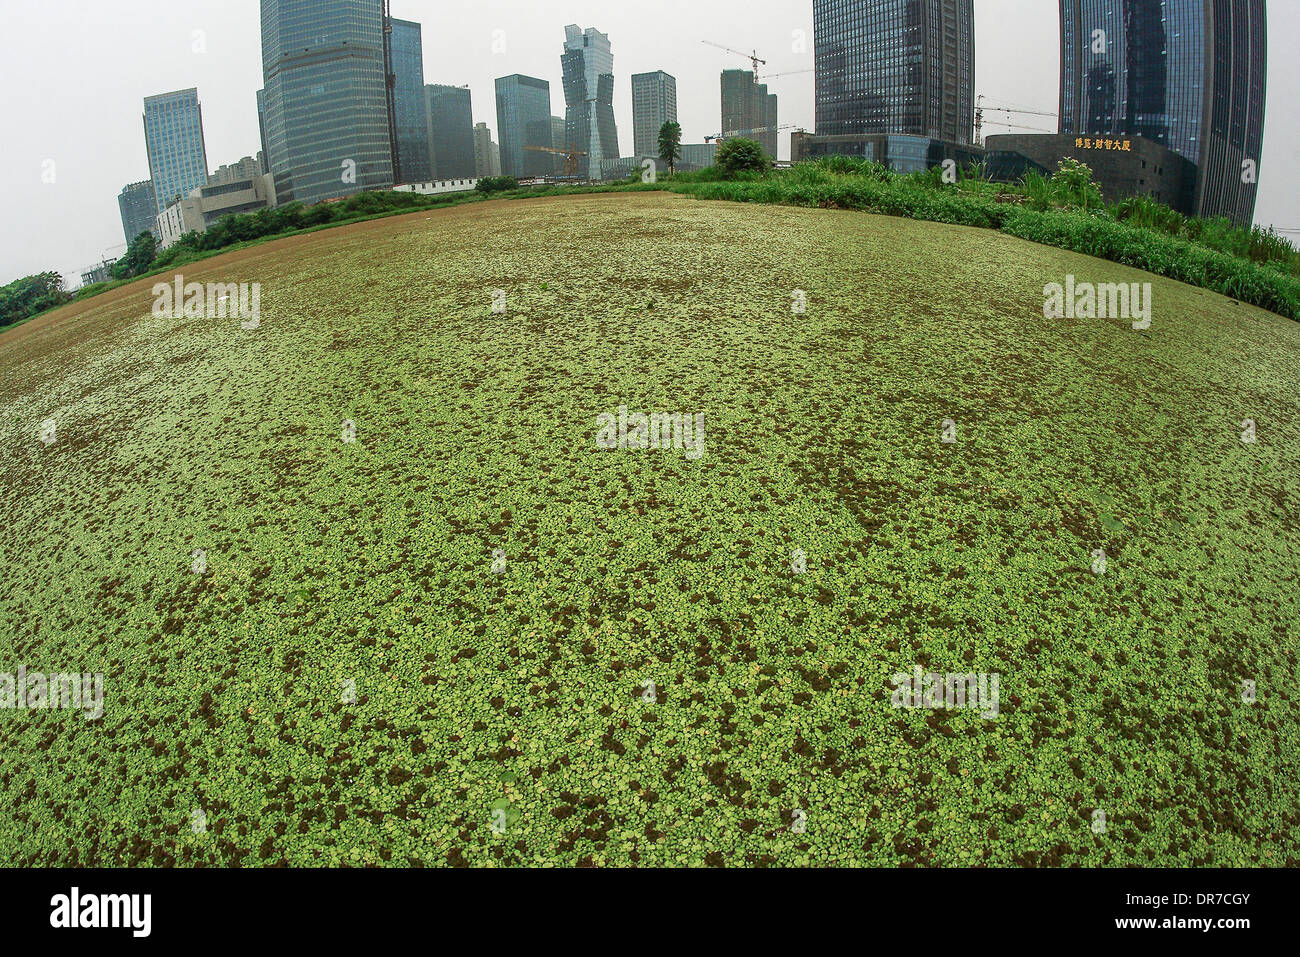 Duckweed River  A river in China is entirely covered in duckweed next to a group of high-rise buildings. This is due to channel mobility, poor and water quality fertile which leads to duckweed blooming.   China - June 2012 Stock Photo